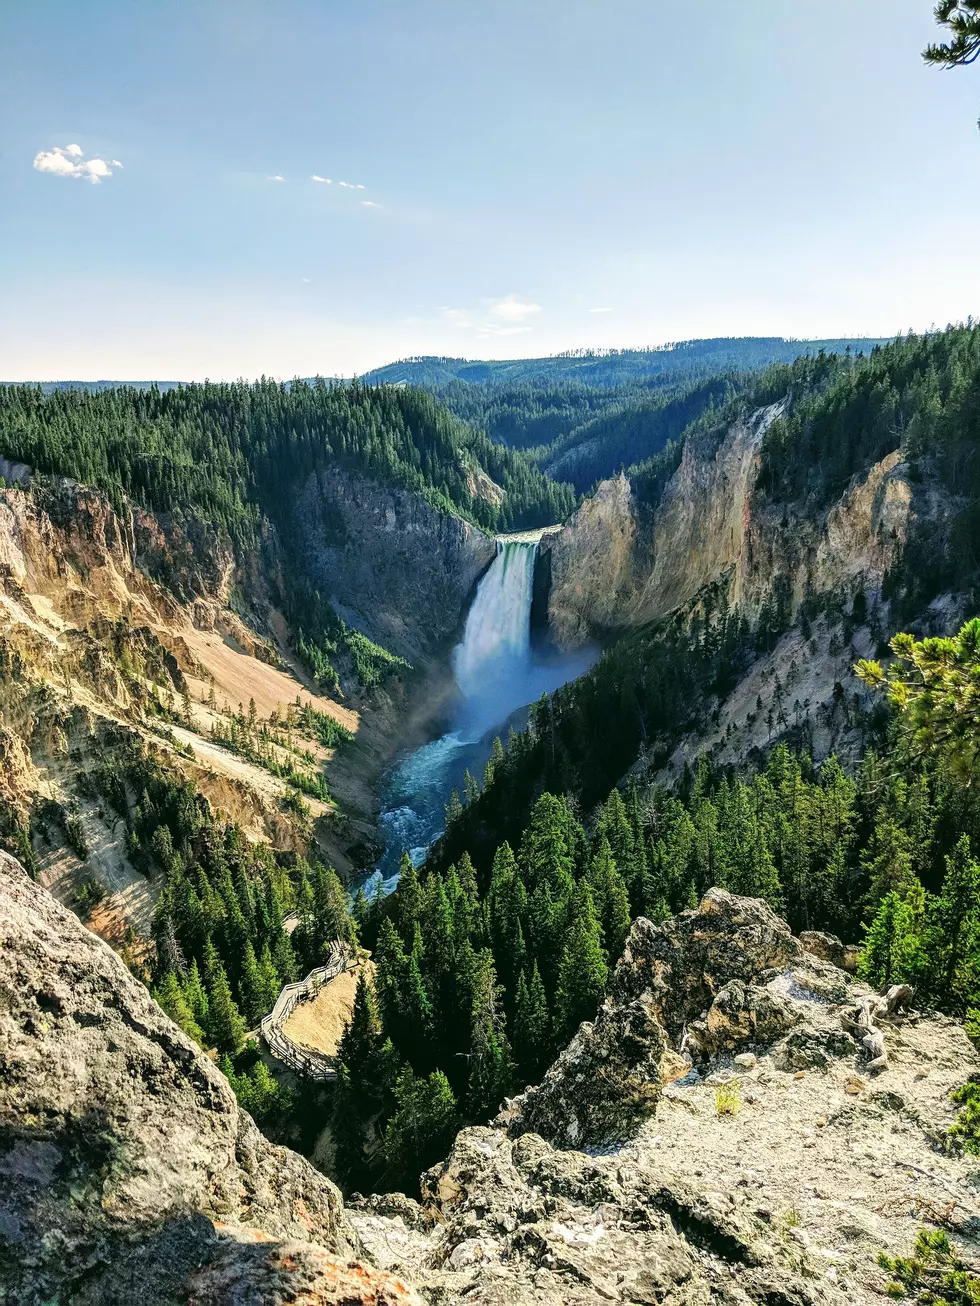 Yellowstone National Park Is Closed But For How Long?